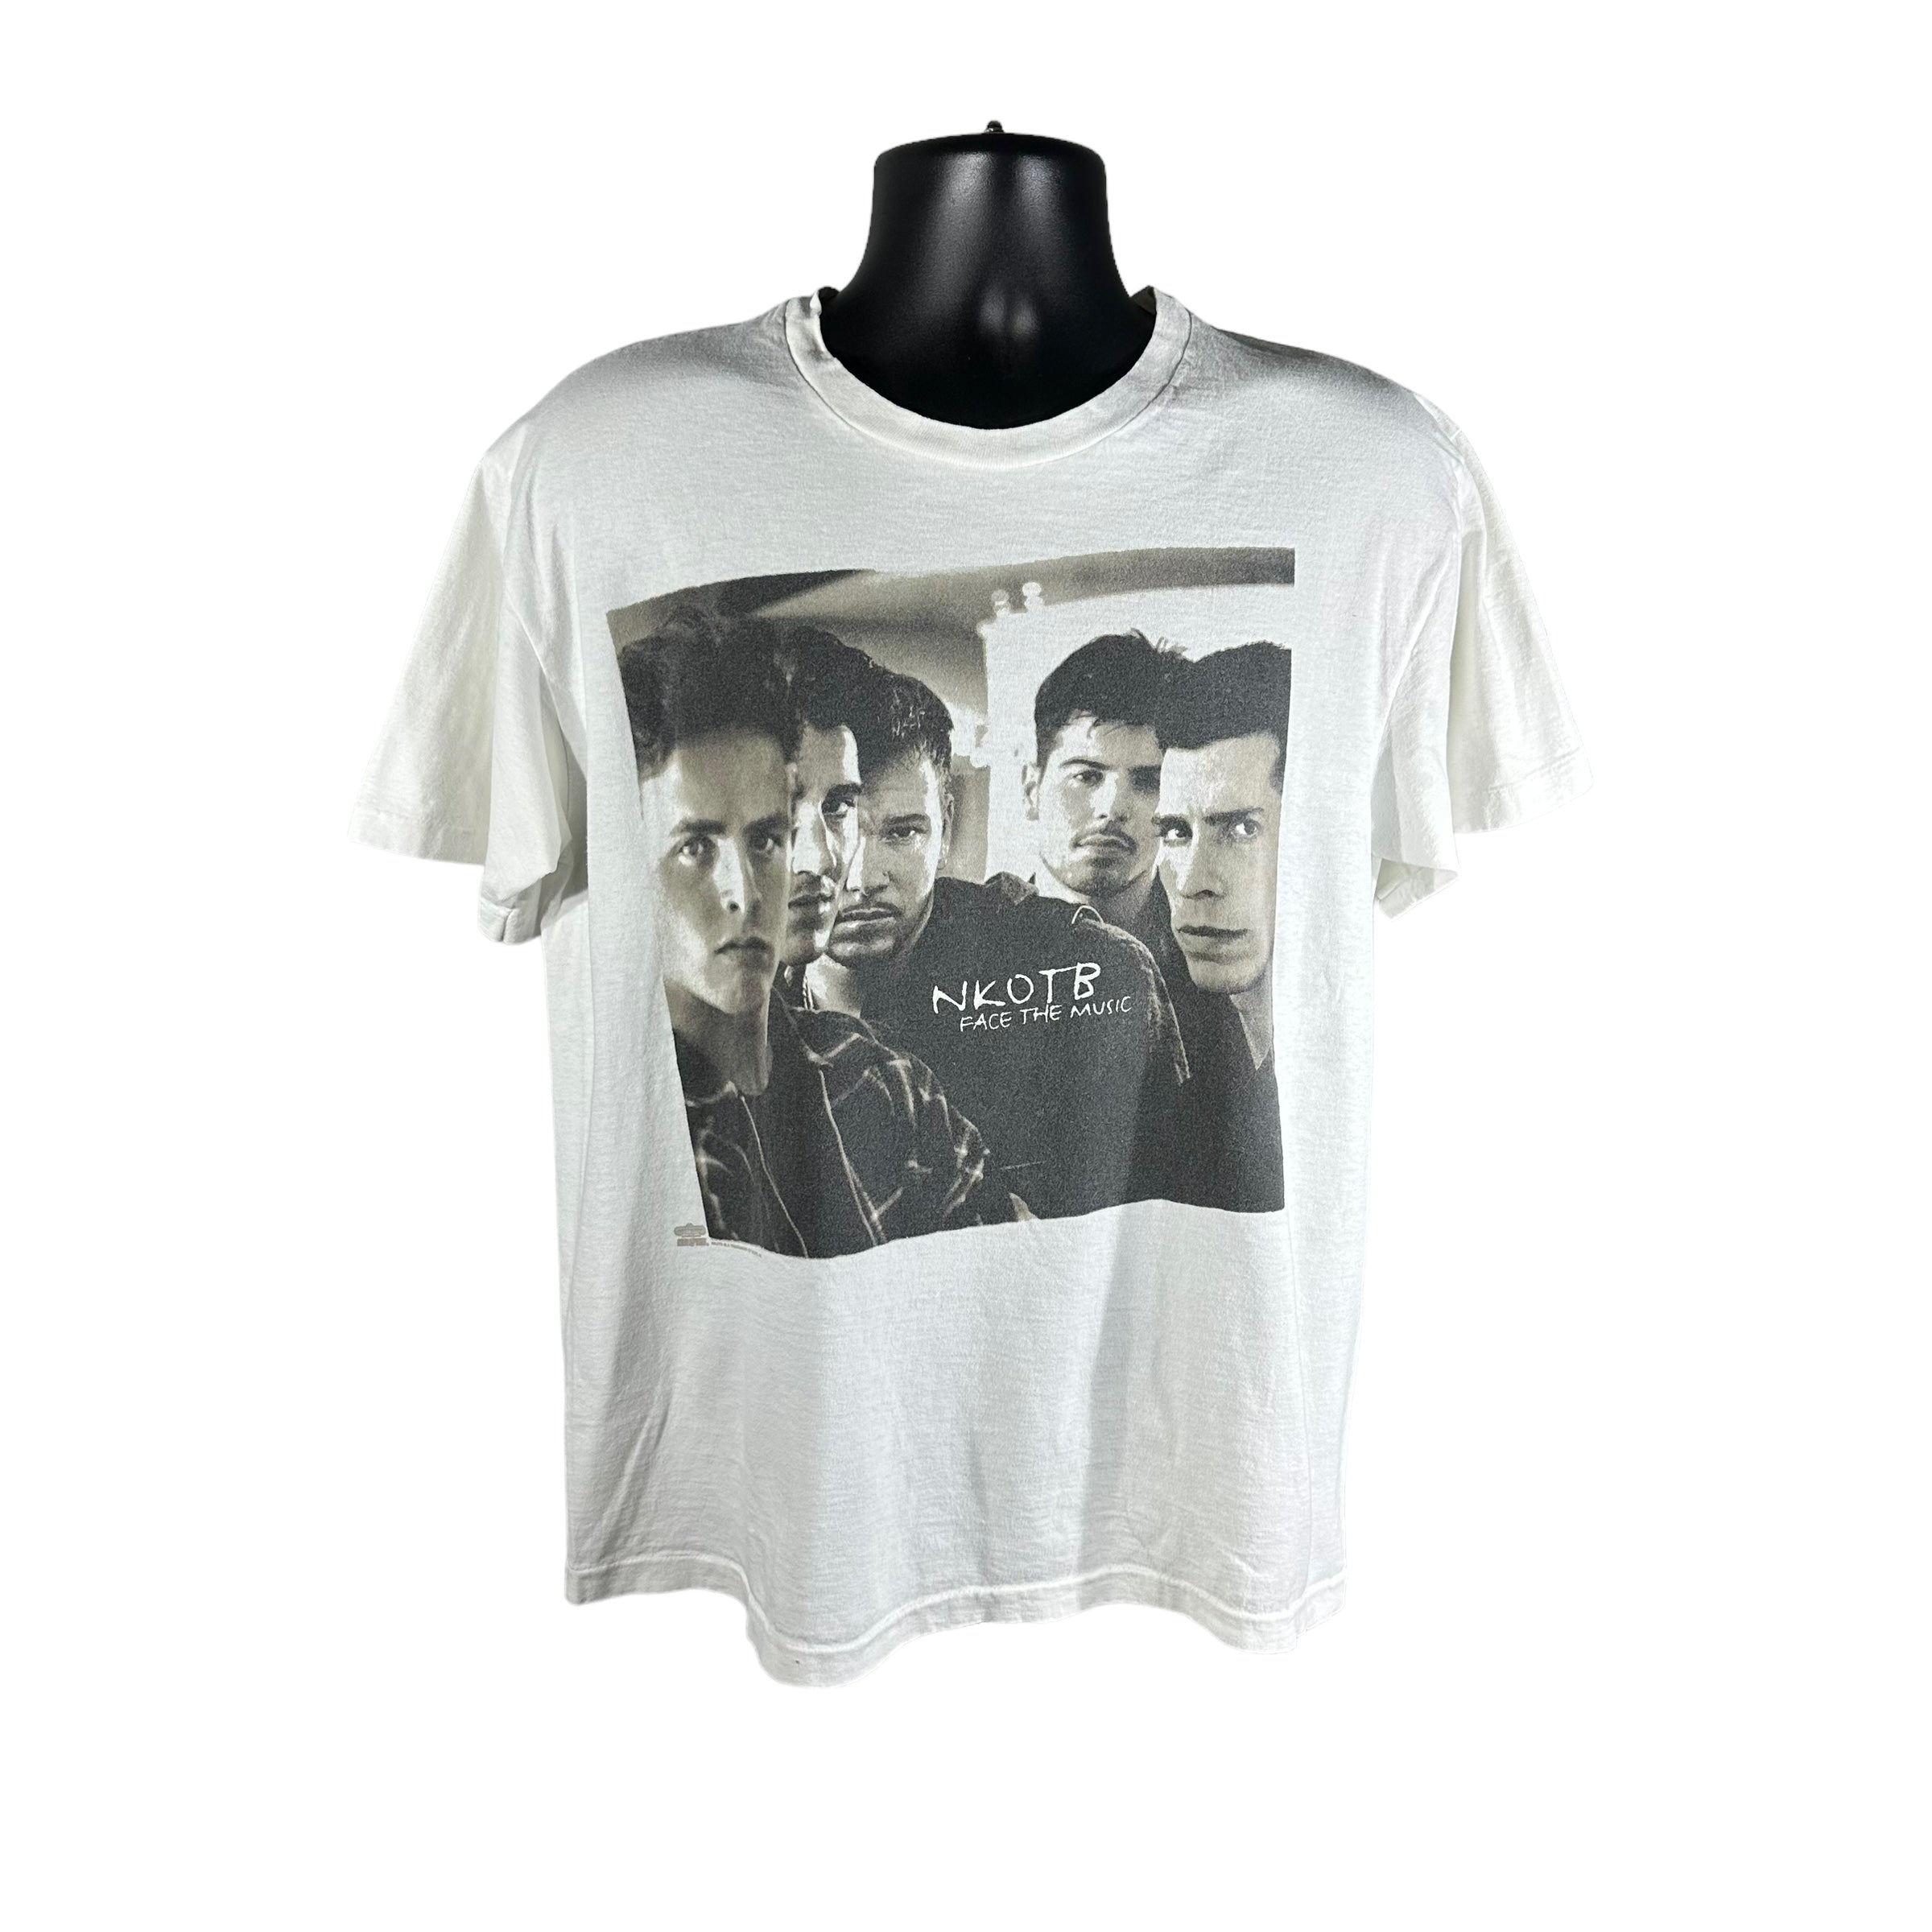 Vintage New Kids on the Block "Face The Music" Band Tee